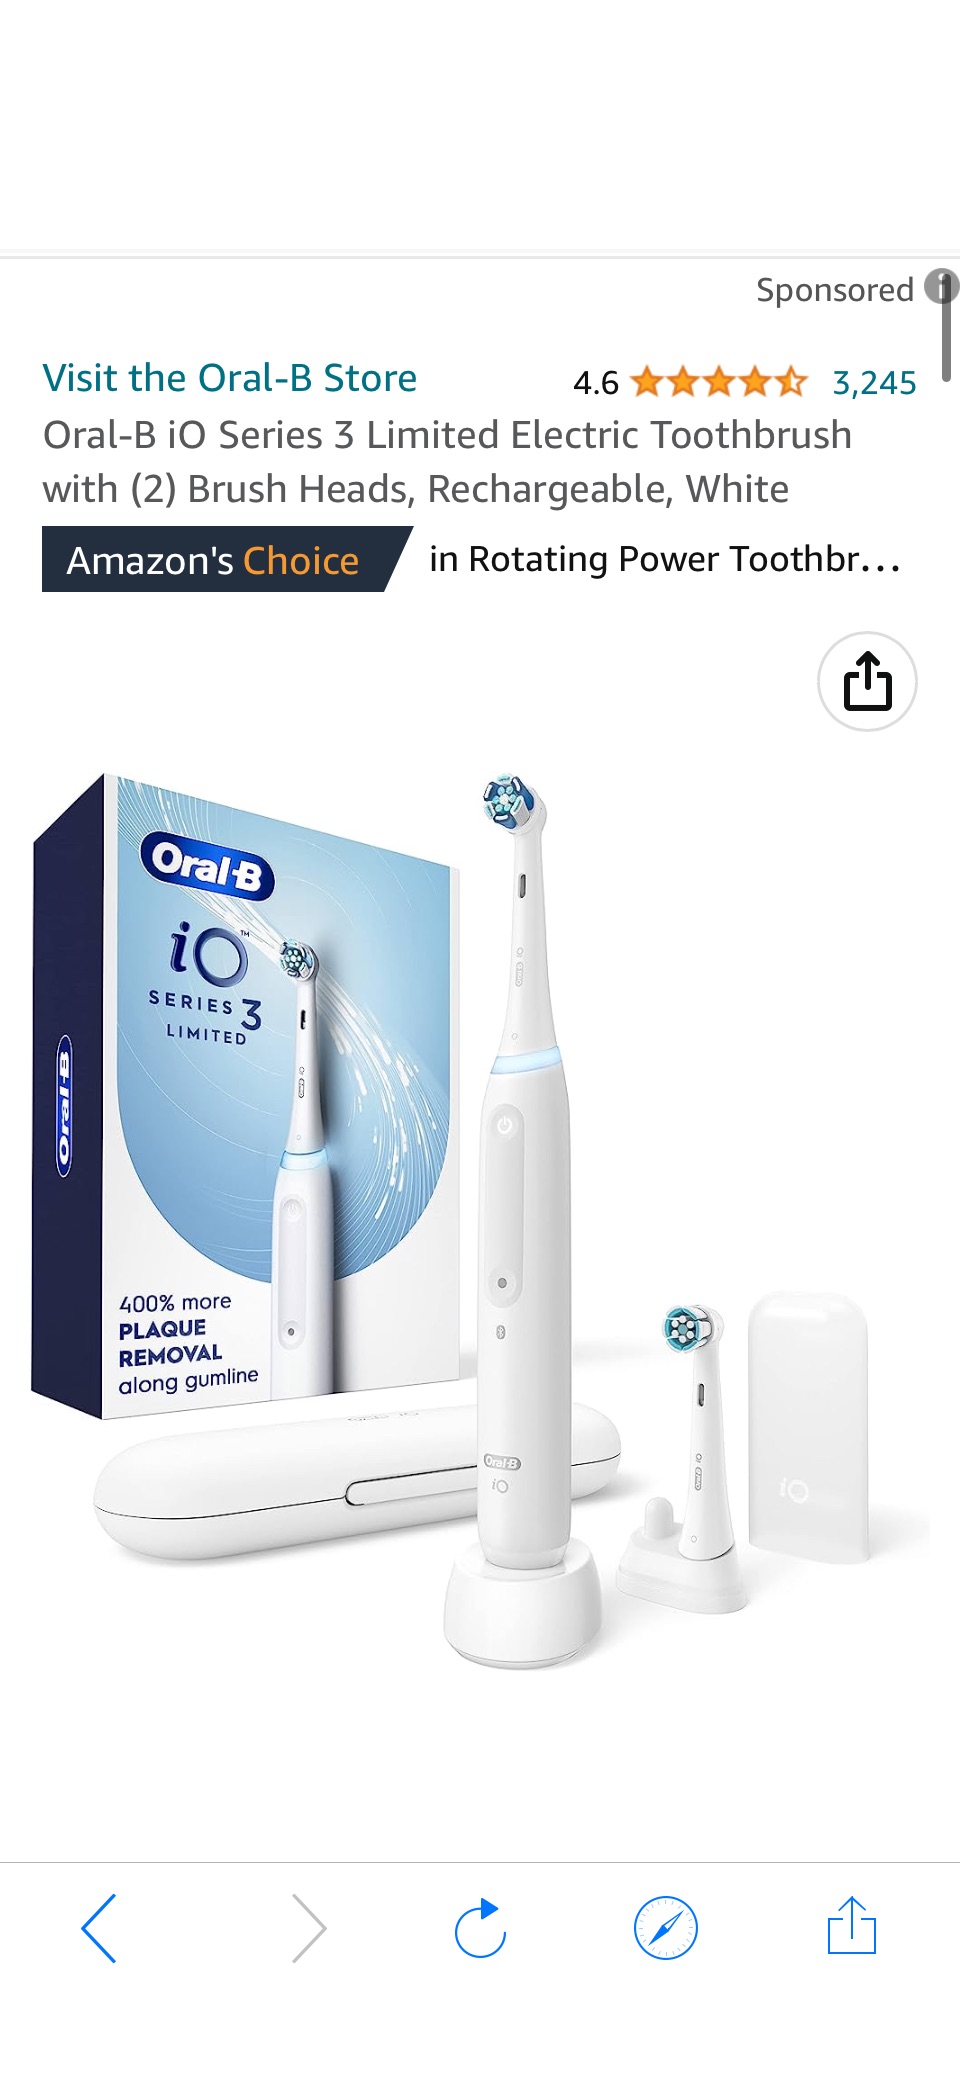 Amazon.com : Oral-B iO Series 3 Limited Electric Toothbrush with (2) Brush Heads, Rechargeable, White : Health & Household原价99.99